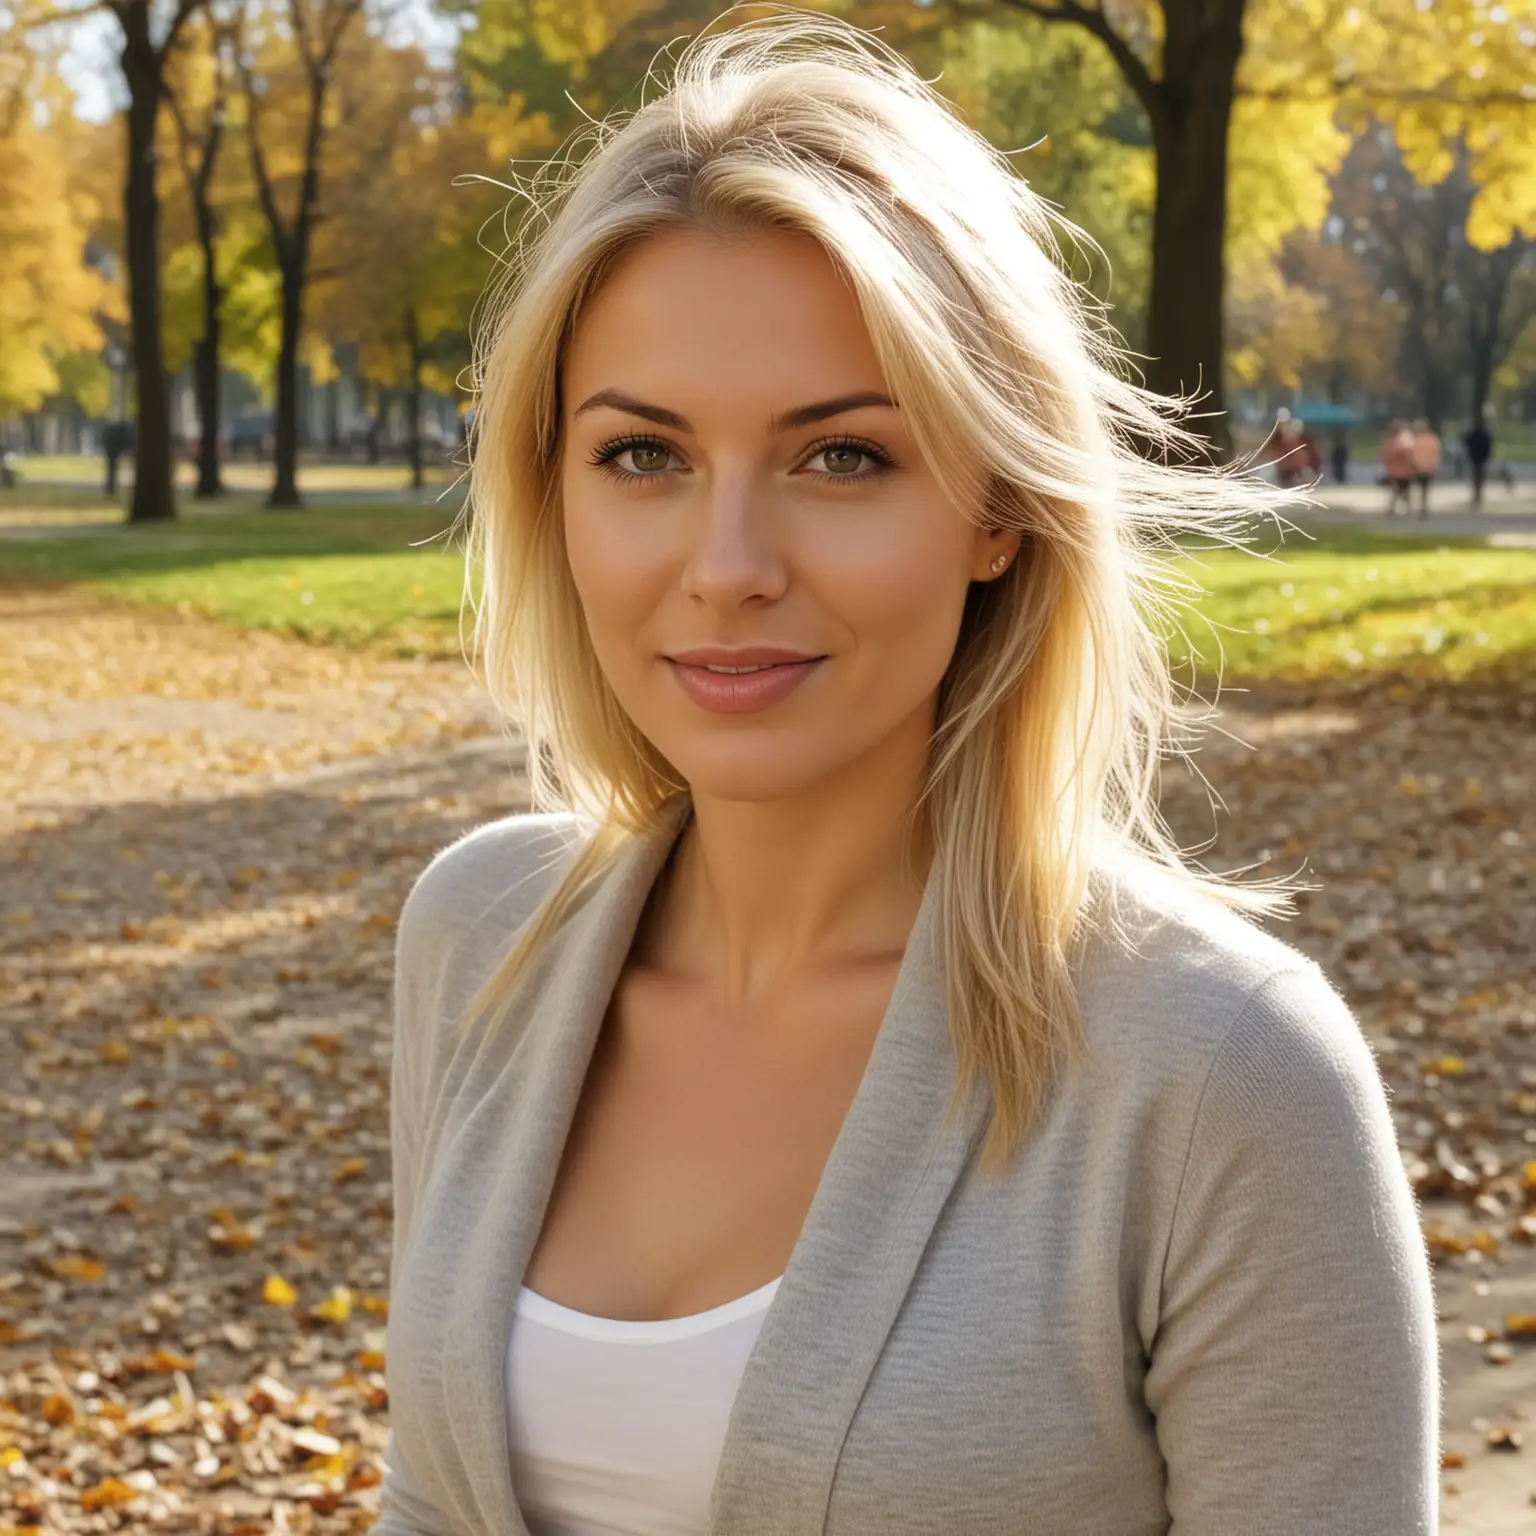 Blond woman in park